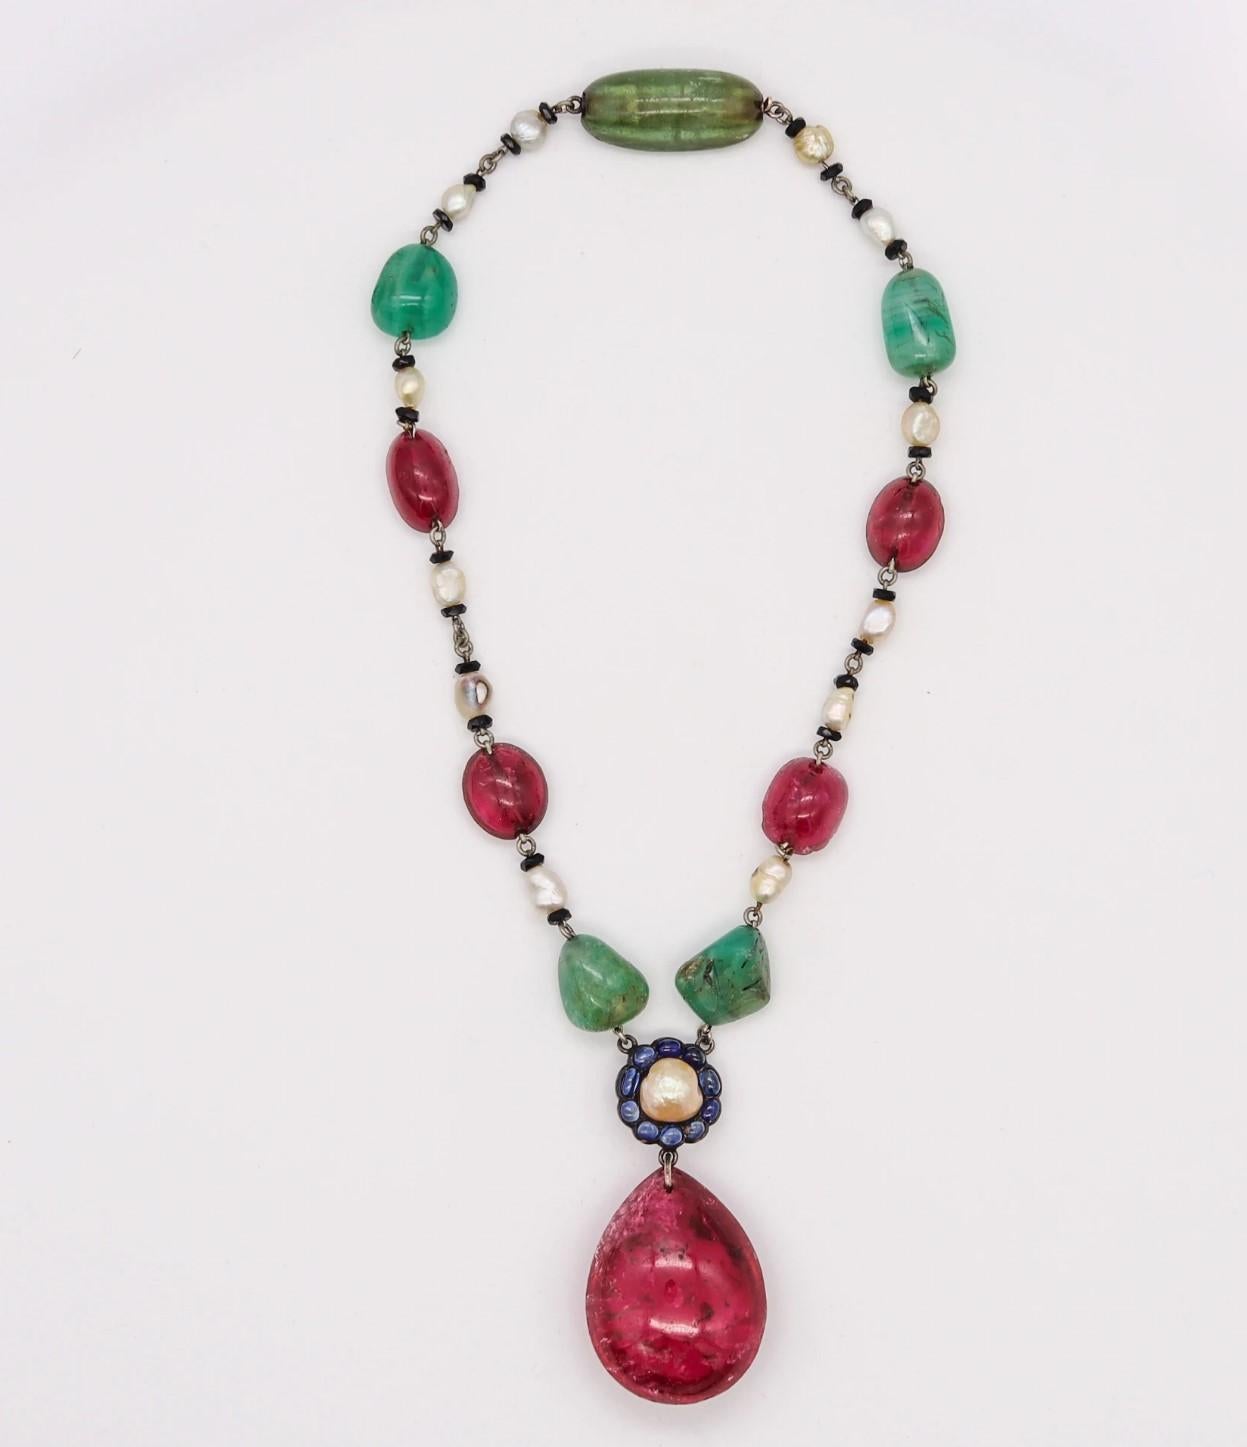 Art Deco Mughal style jeweled necklace.

Beautiful and colorful piece, most probably created in England during the Art Deco period, back in the 1920. This very unusual and striking necklace was assembled in the Mughal Tutti Frutti style with silver